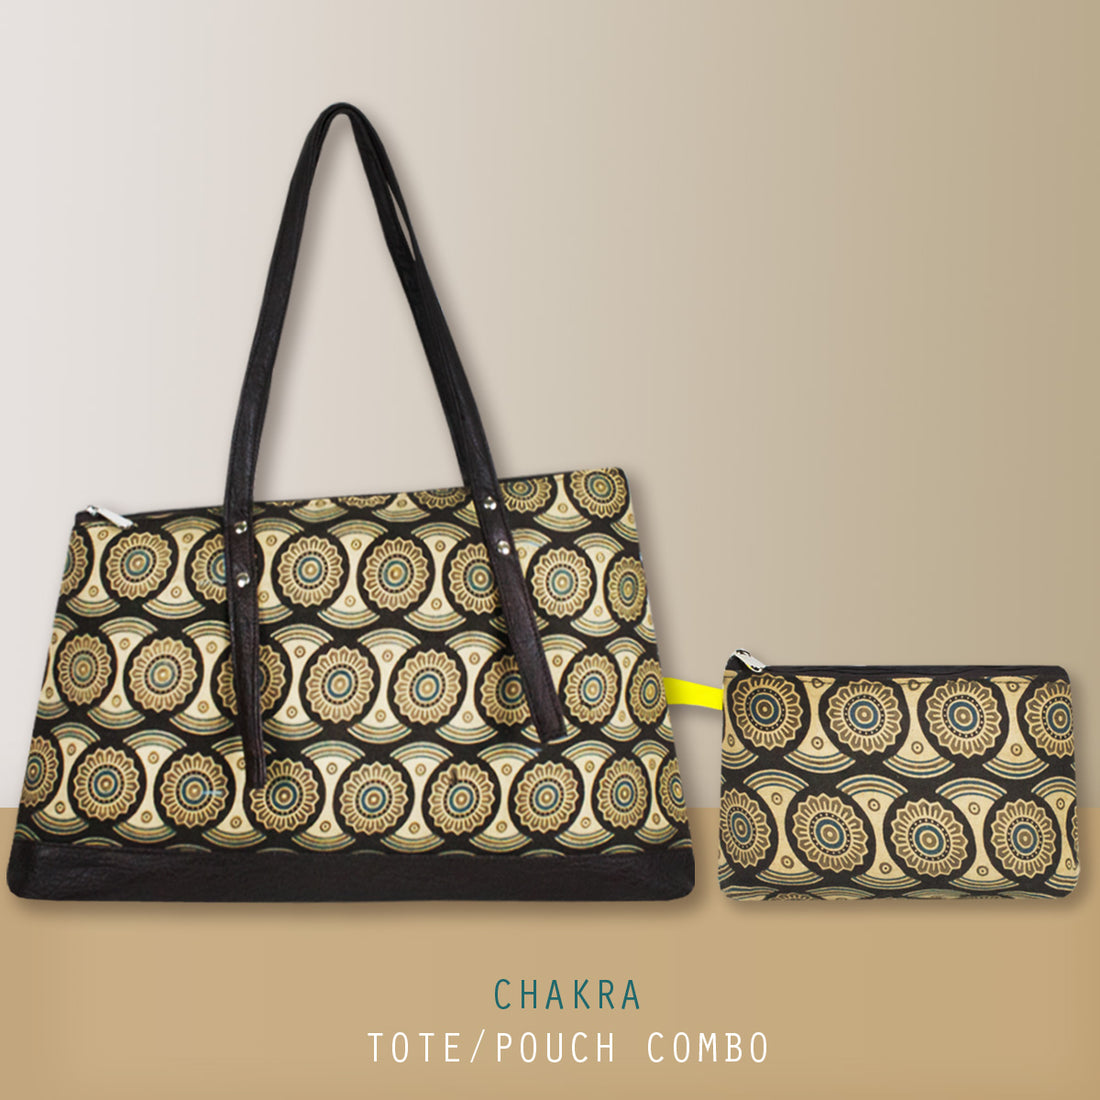 Chakra Tile Tote/Pouch Combo